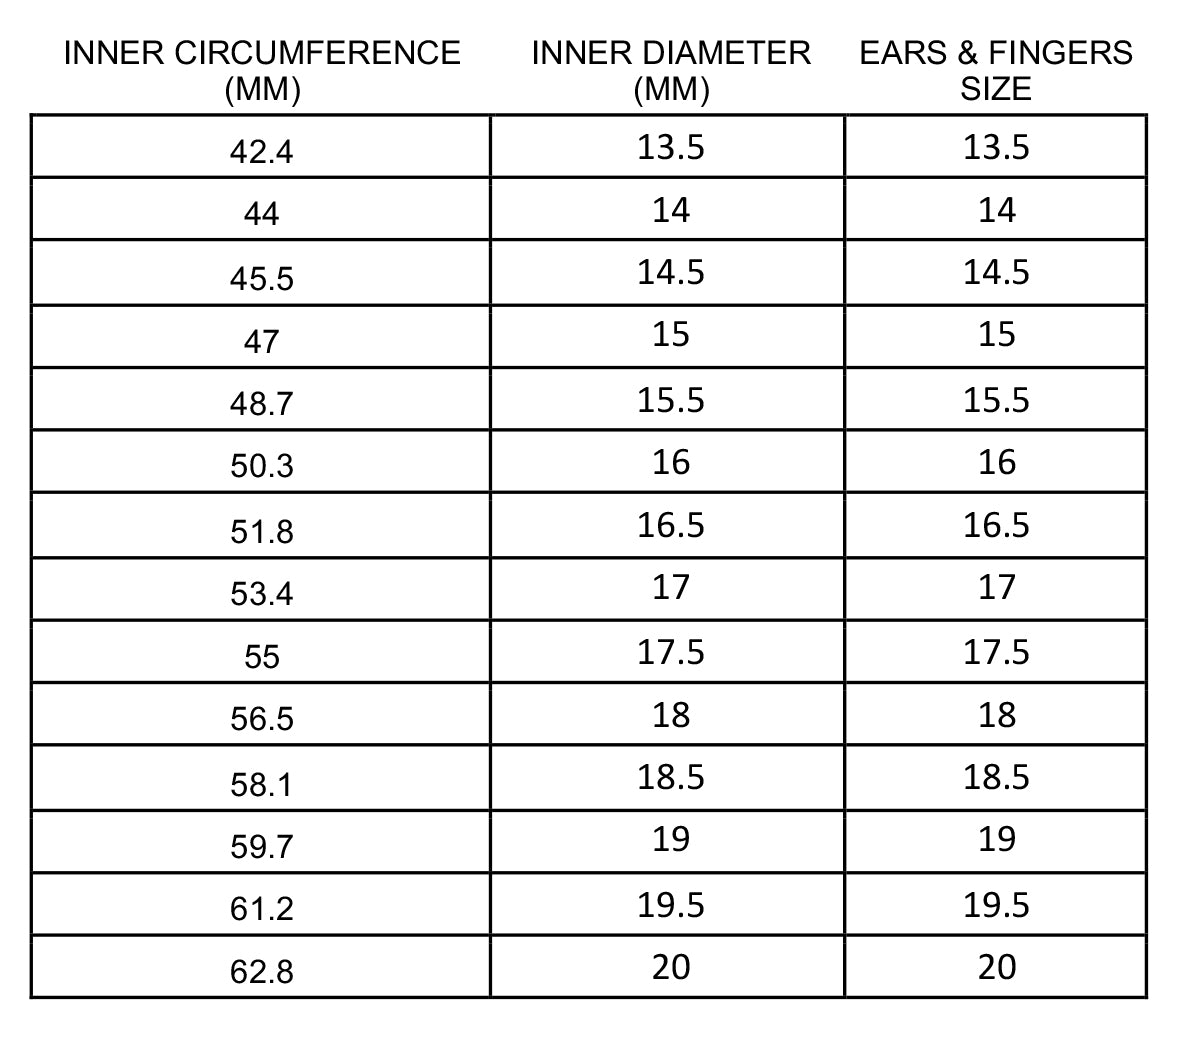 RING SIZING – EARS & FINGERS